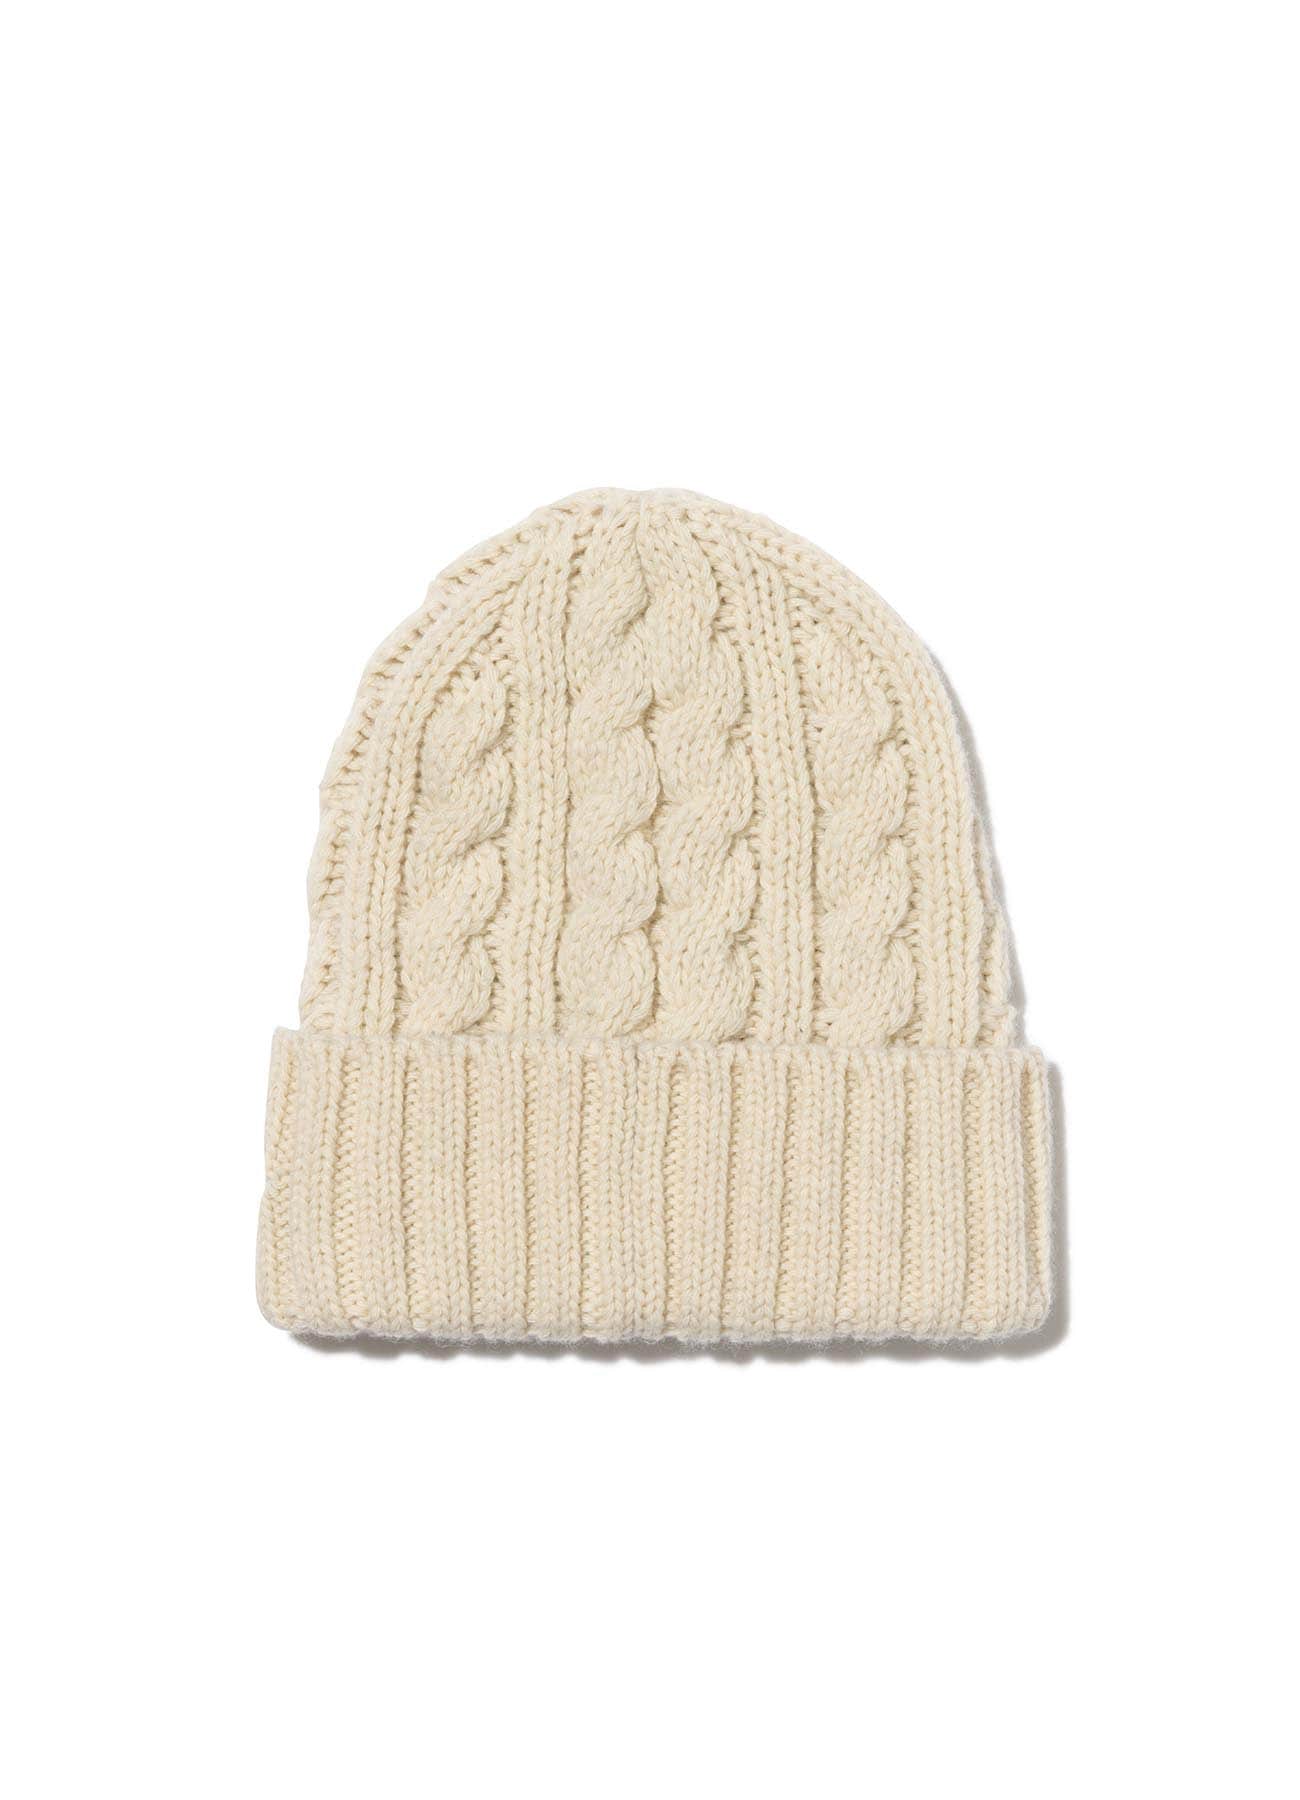 Y's × New Era] LOW GAUGE CUFF KNIT(FREE SIZE Off White): Y's｜THE 